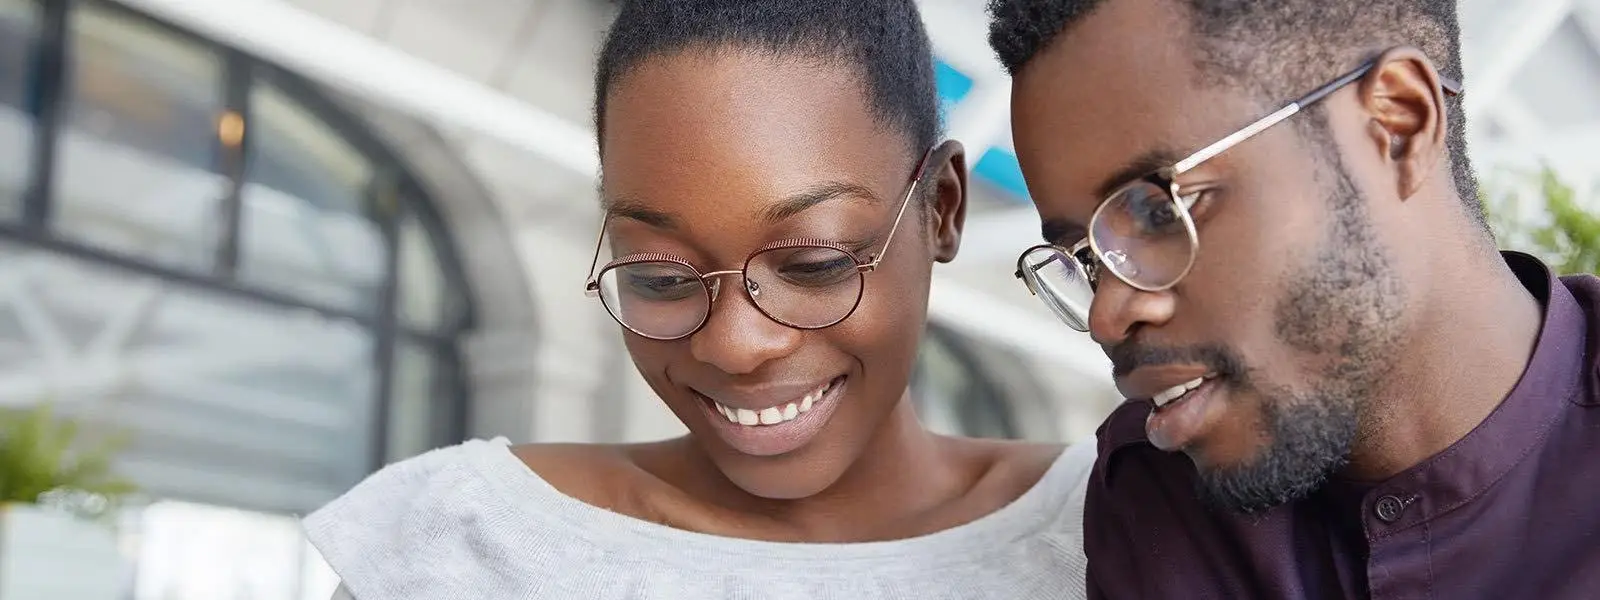 young couple both wearing glasses looking down and smiling